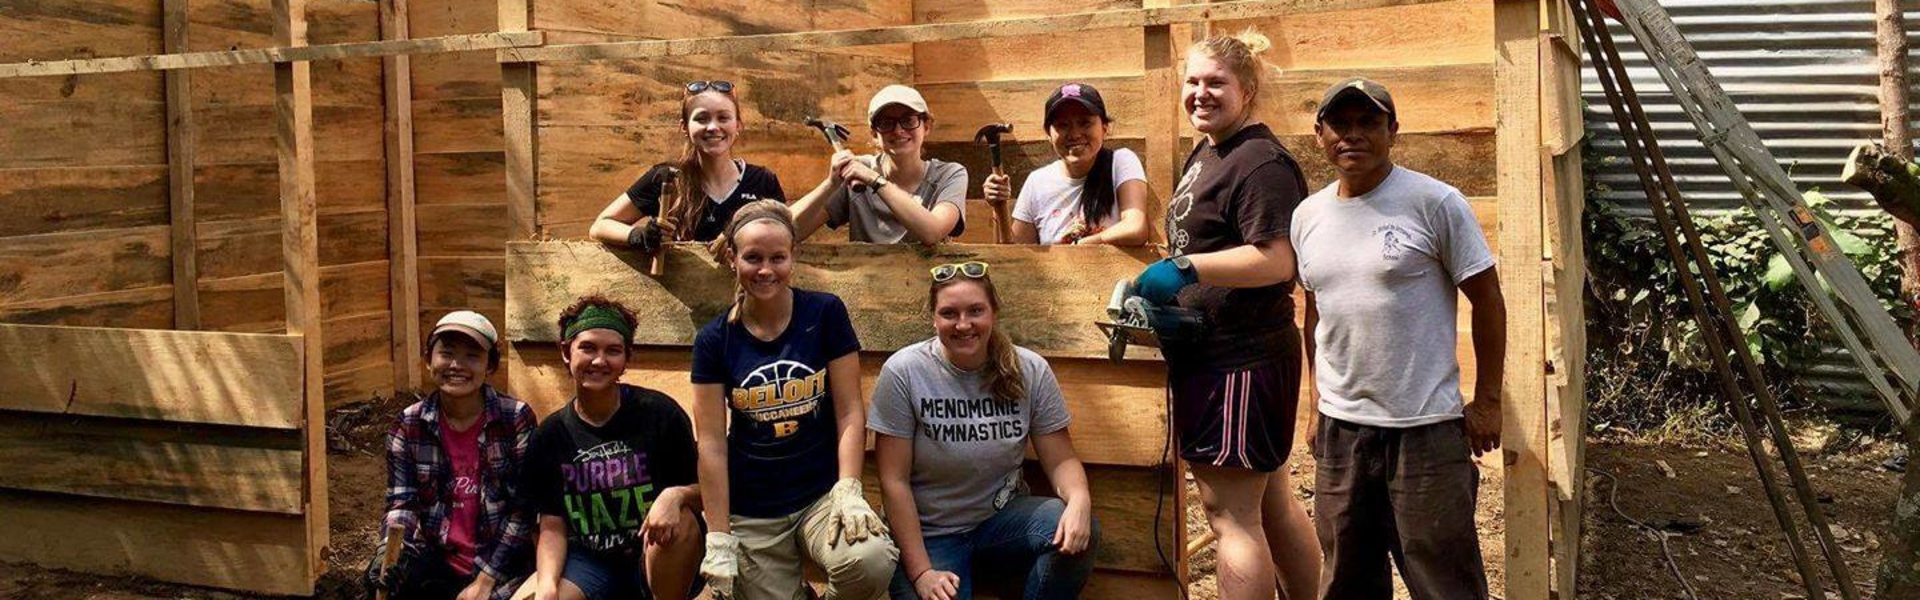 Blugolds helping hands, Guatemala Social and Environmental Justice Faculty-Led Immersion, Winterim 2017